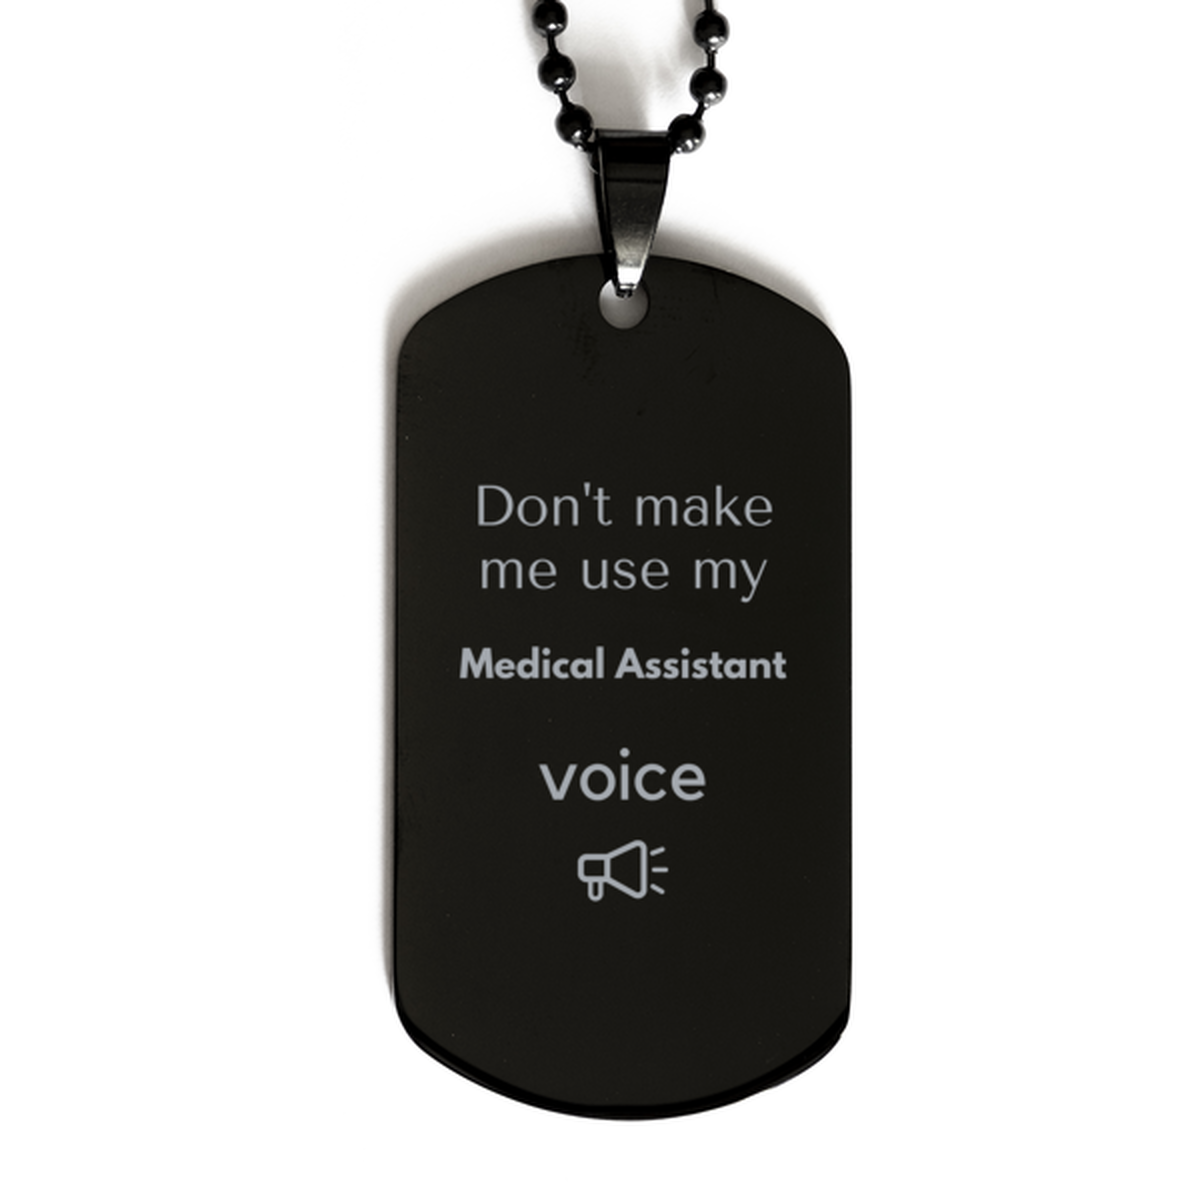 Don't make me use my Medical Assistant voice, Sarcasm Medical Assistant Gifts, Christmas Medical Assistant Black Dog Tag Birthday Unique Gifts For Medical Assistant Coworkers, Men, Women, Colleague, Friends